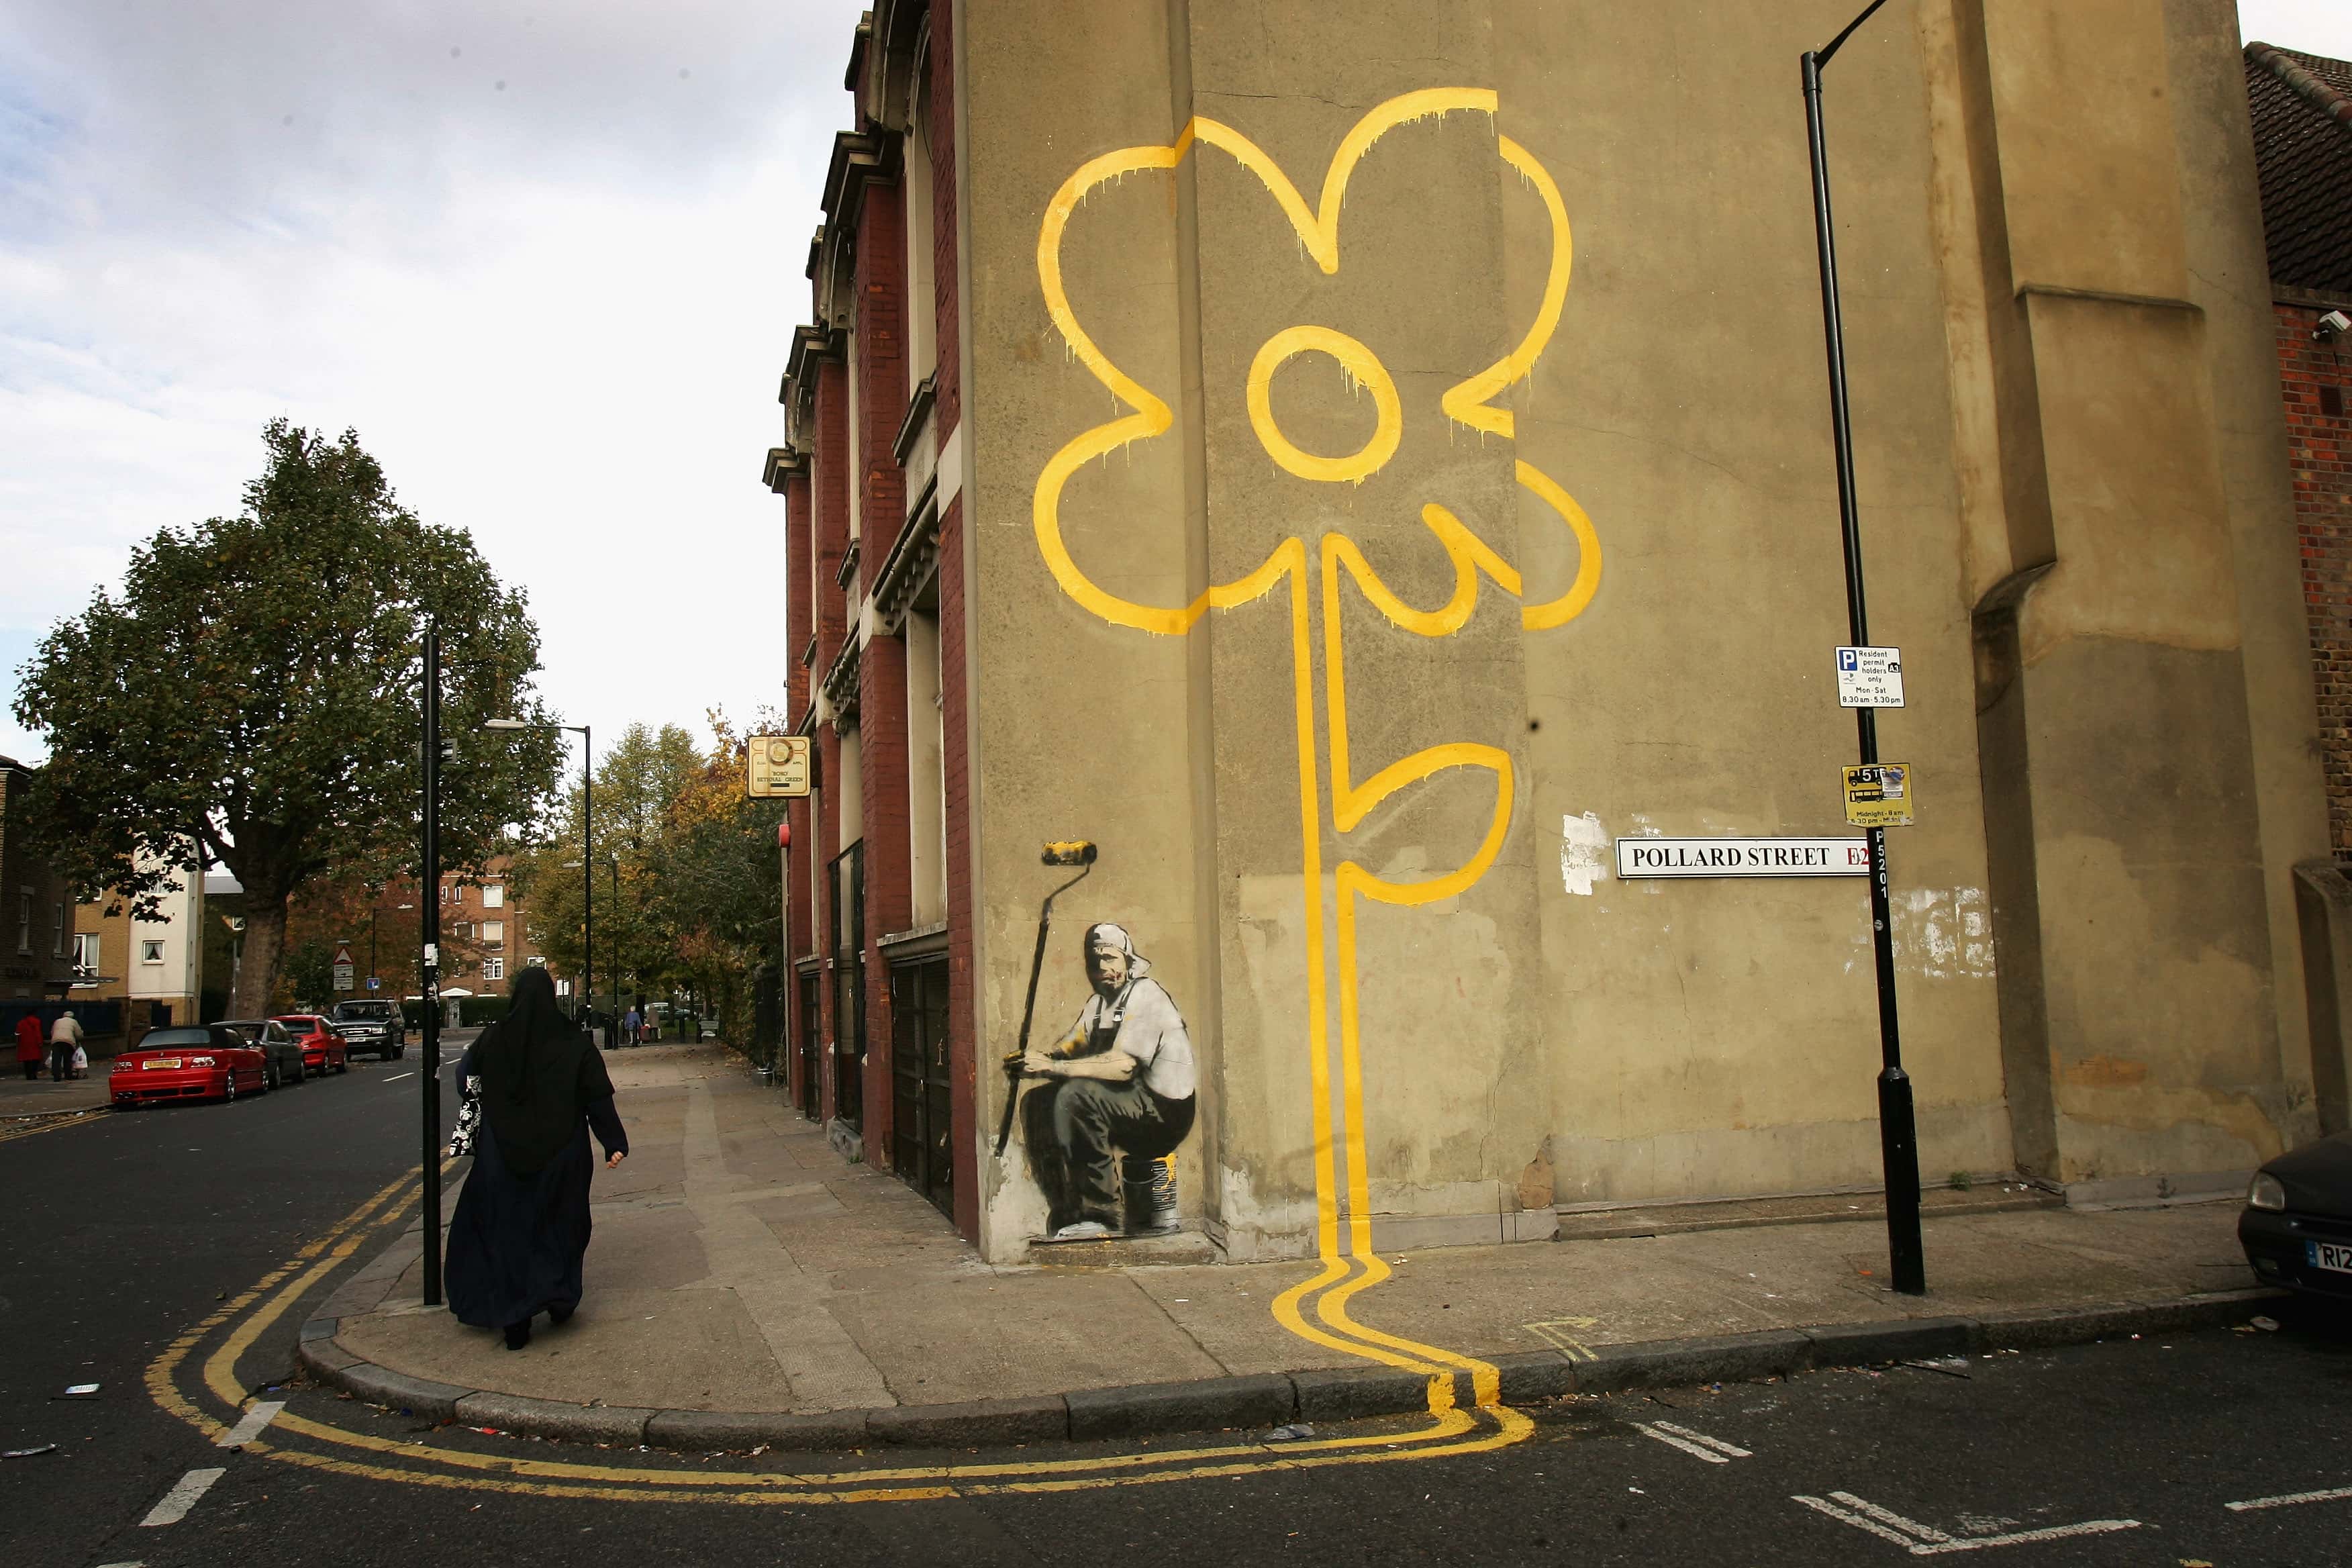 42 Cryptic Facts About Banksy, The Mysterious Street Artist